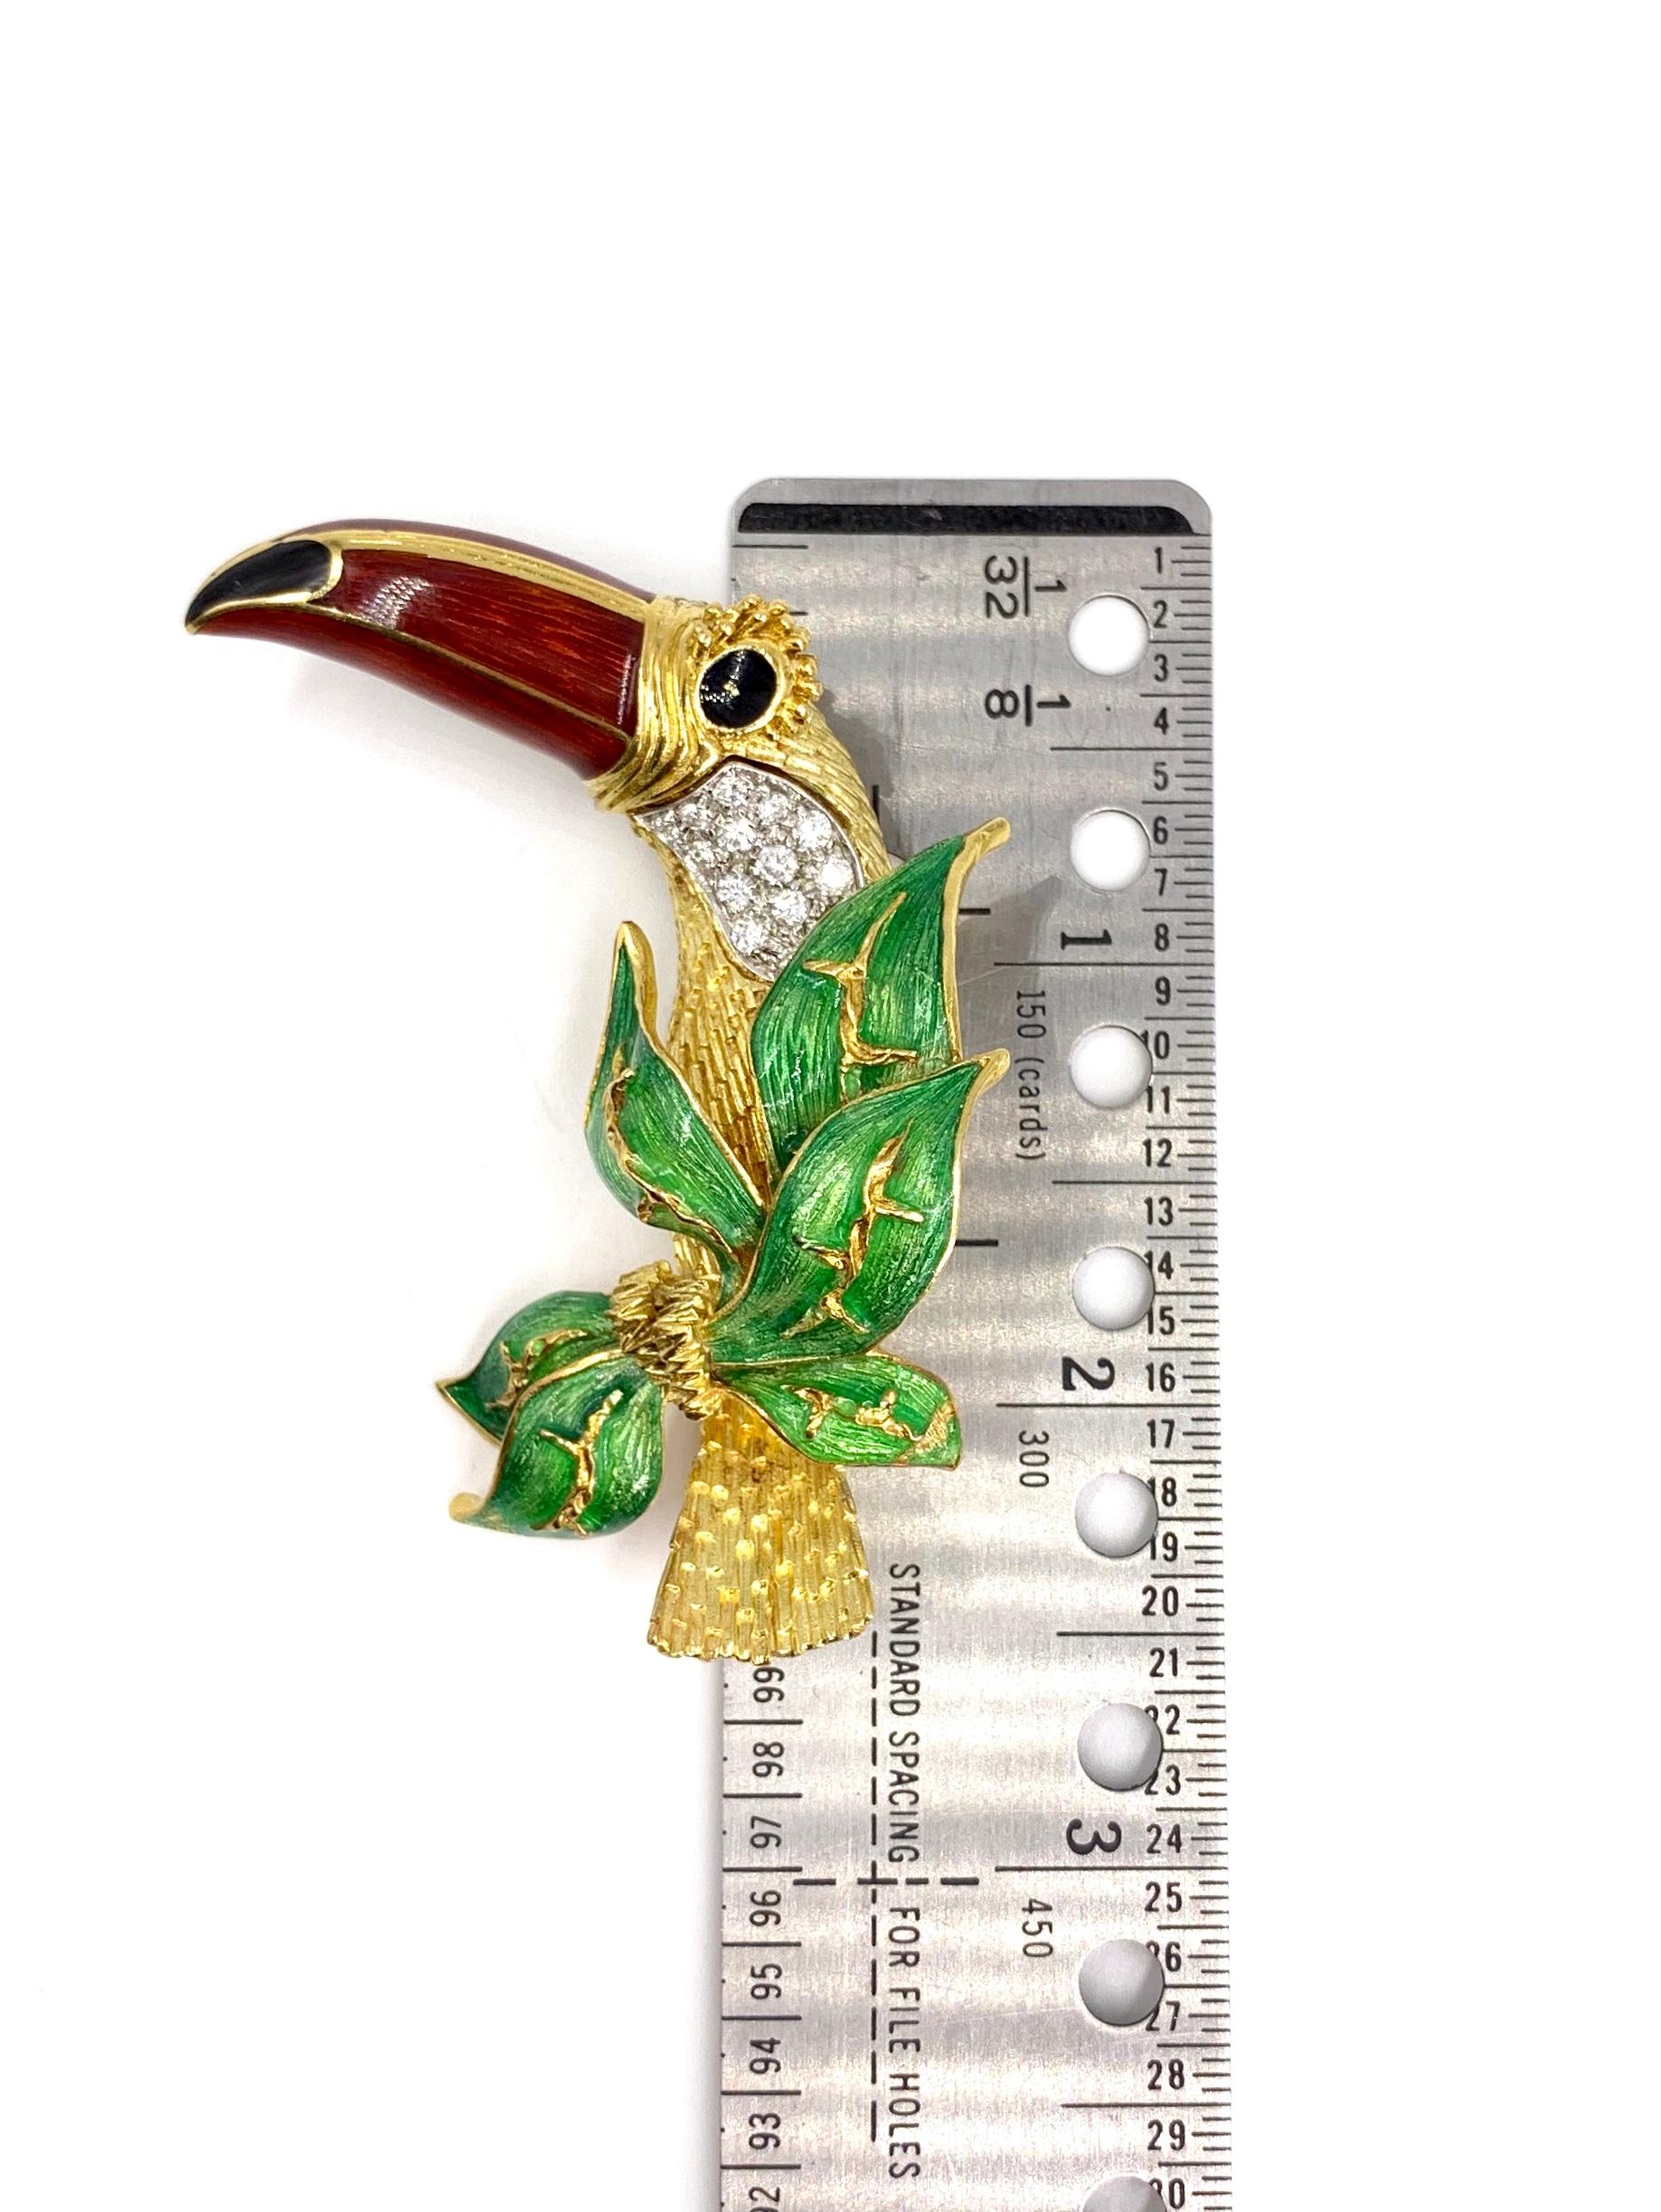 18 Karat Diamond and Enamel Toucan Bird Brooch In Good Condition For Sale In Pikesville, MD